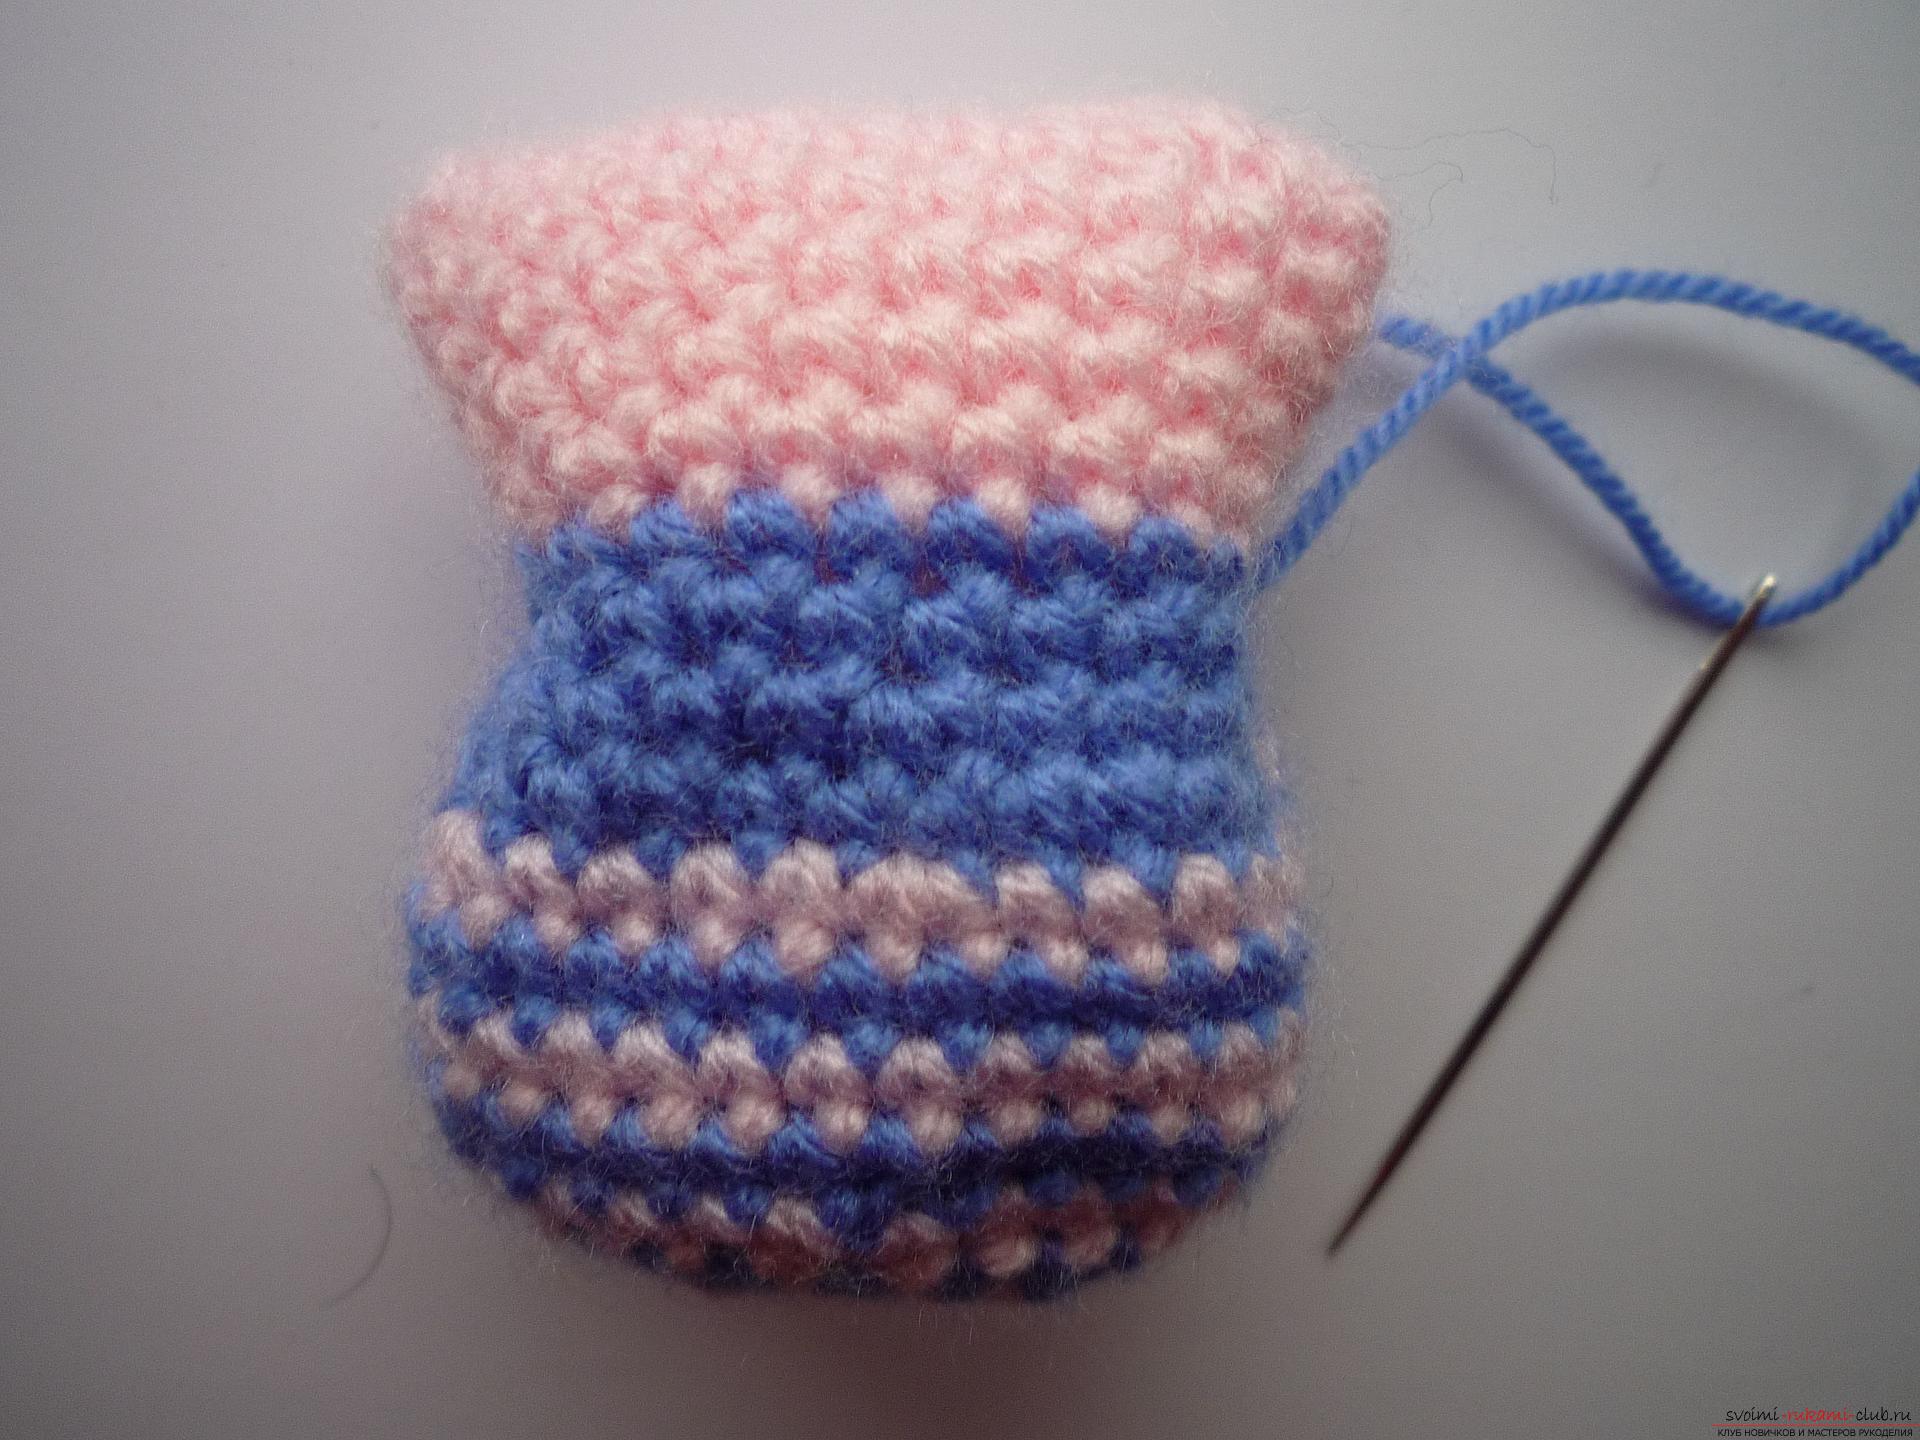 A detailed master-class will teach how to crochet a toy - an amenity in the amigurumi style. Photo number 12